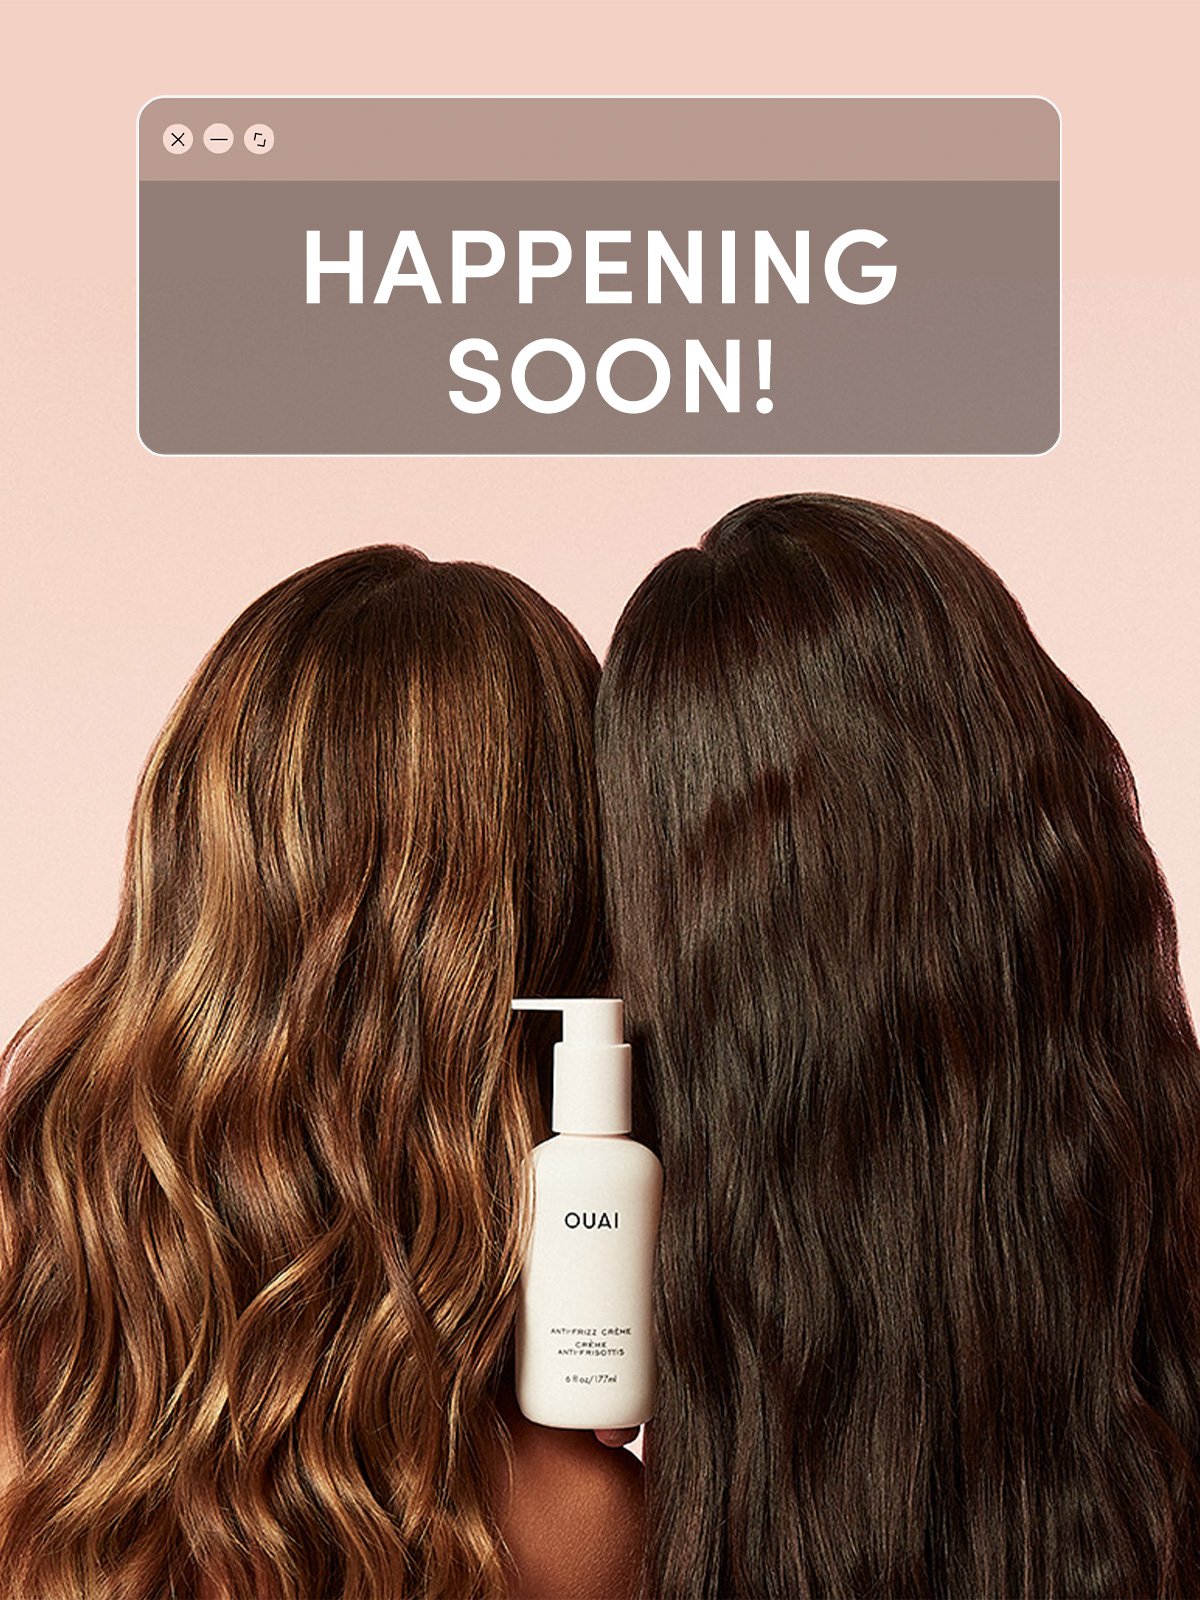 Let us know if you’re feeling frizzy & get signed up—you’ll be the first to know when it drops.